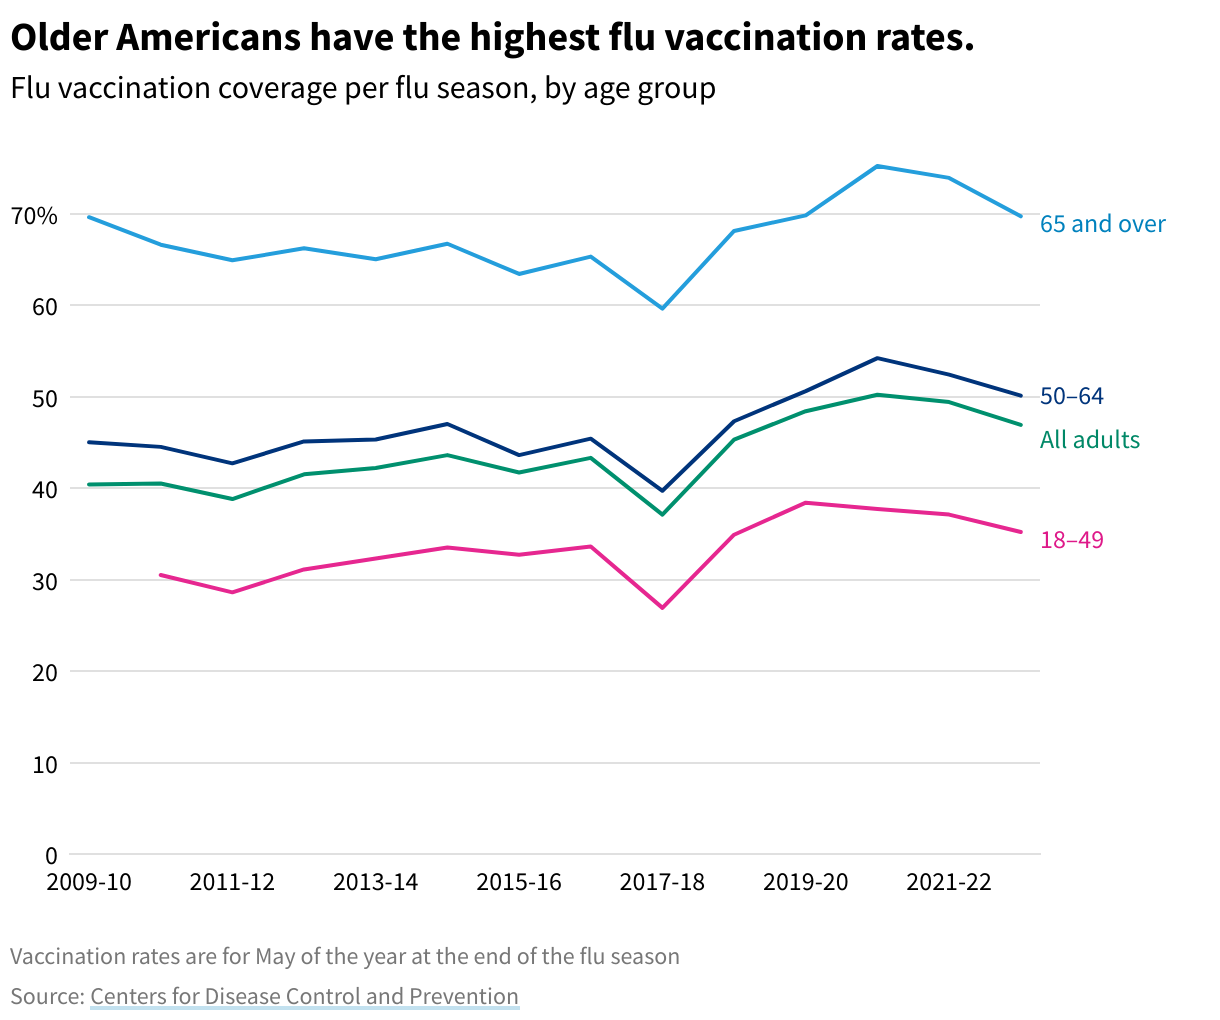 Line chart showing flu vaccination coverage per flu season, by age group. Adults 65 and over have the highest rates. 